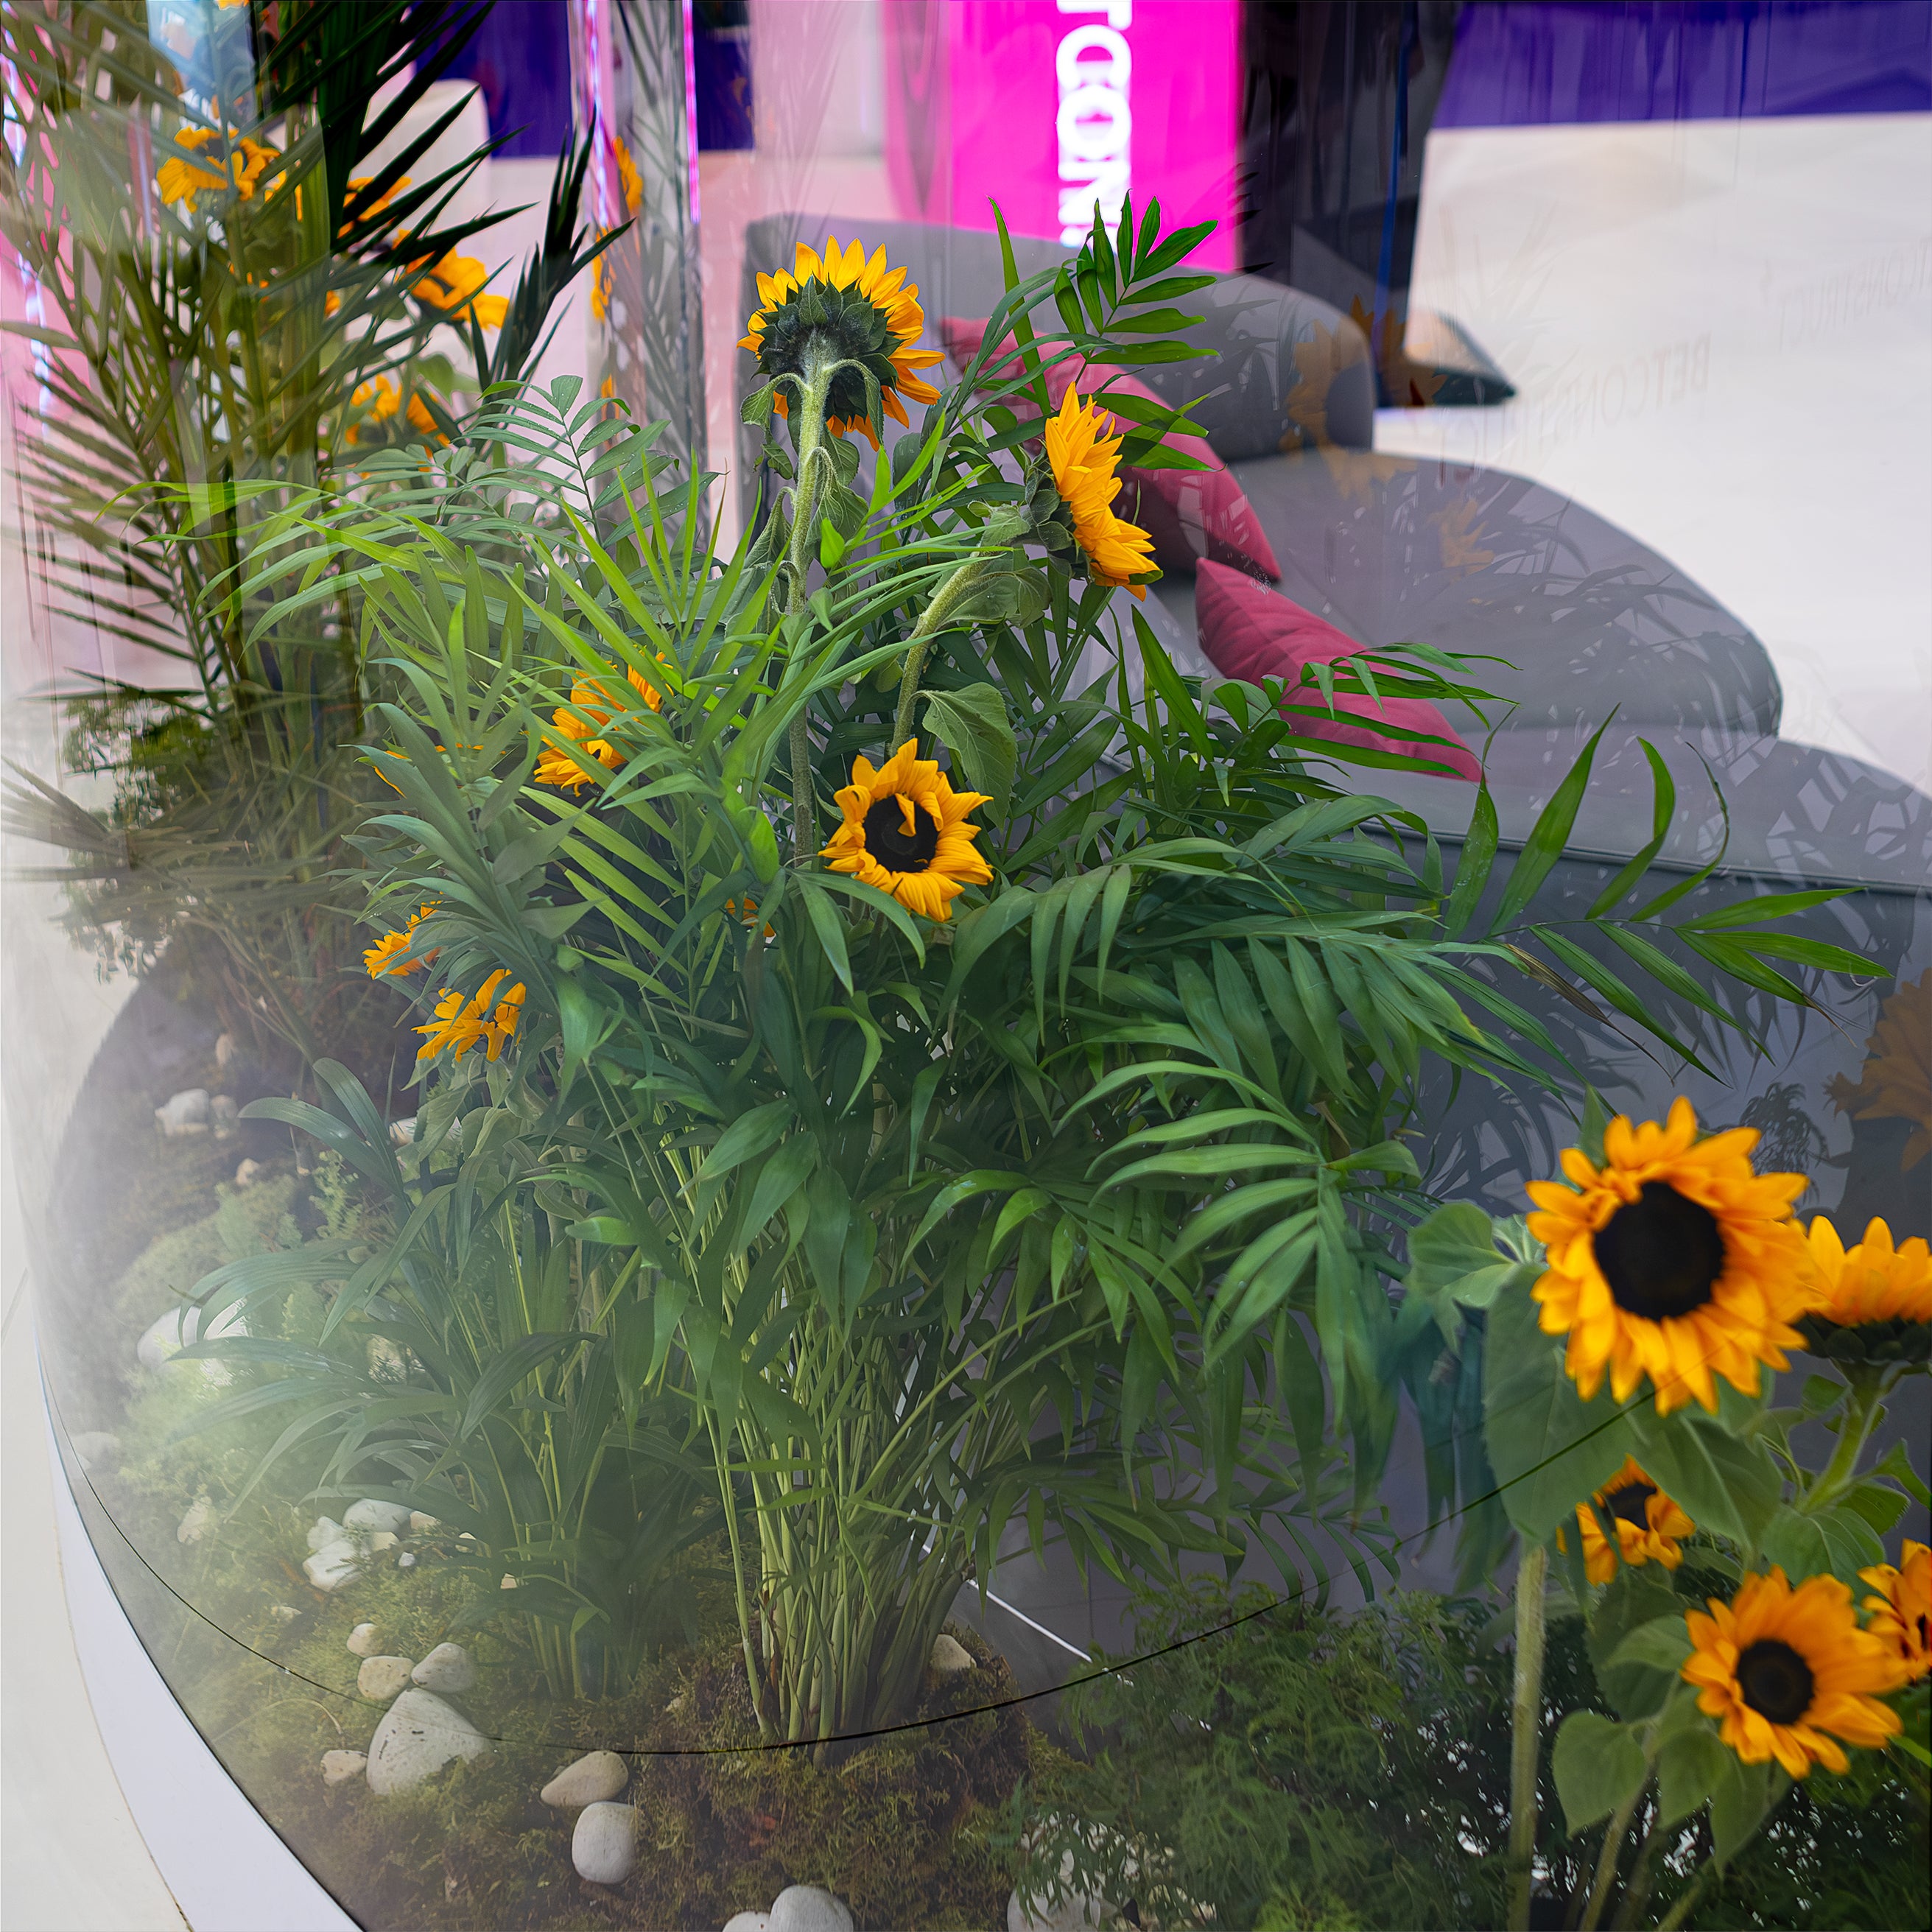 A Close-up view of our bespoke floral arrangements with sunflowers and greenery inside a glass floral display at The ICE London Exhibition, under a warm soft lighting.